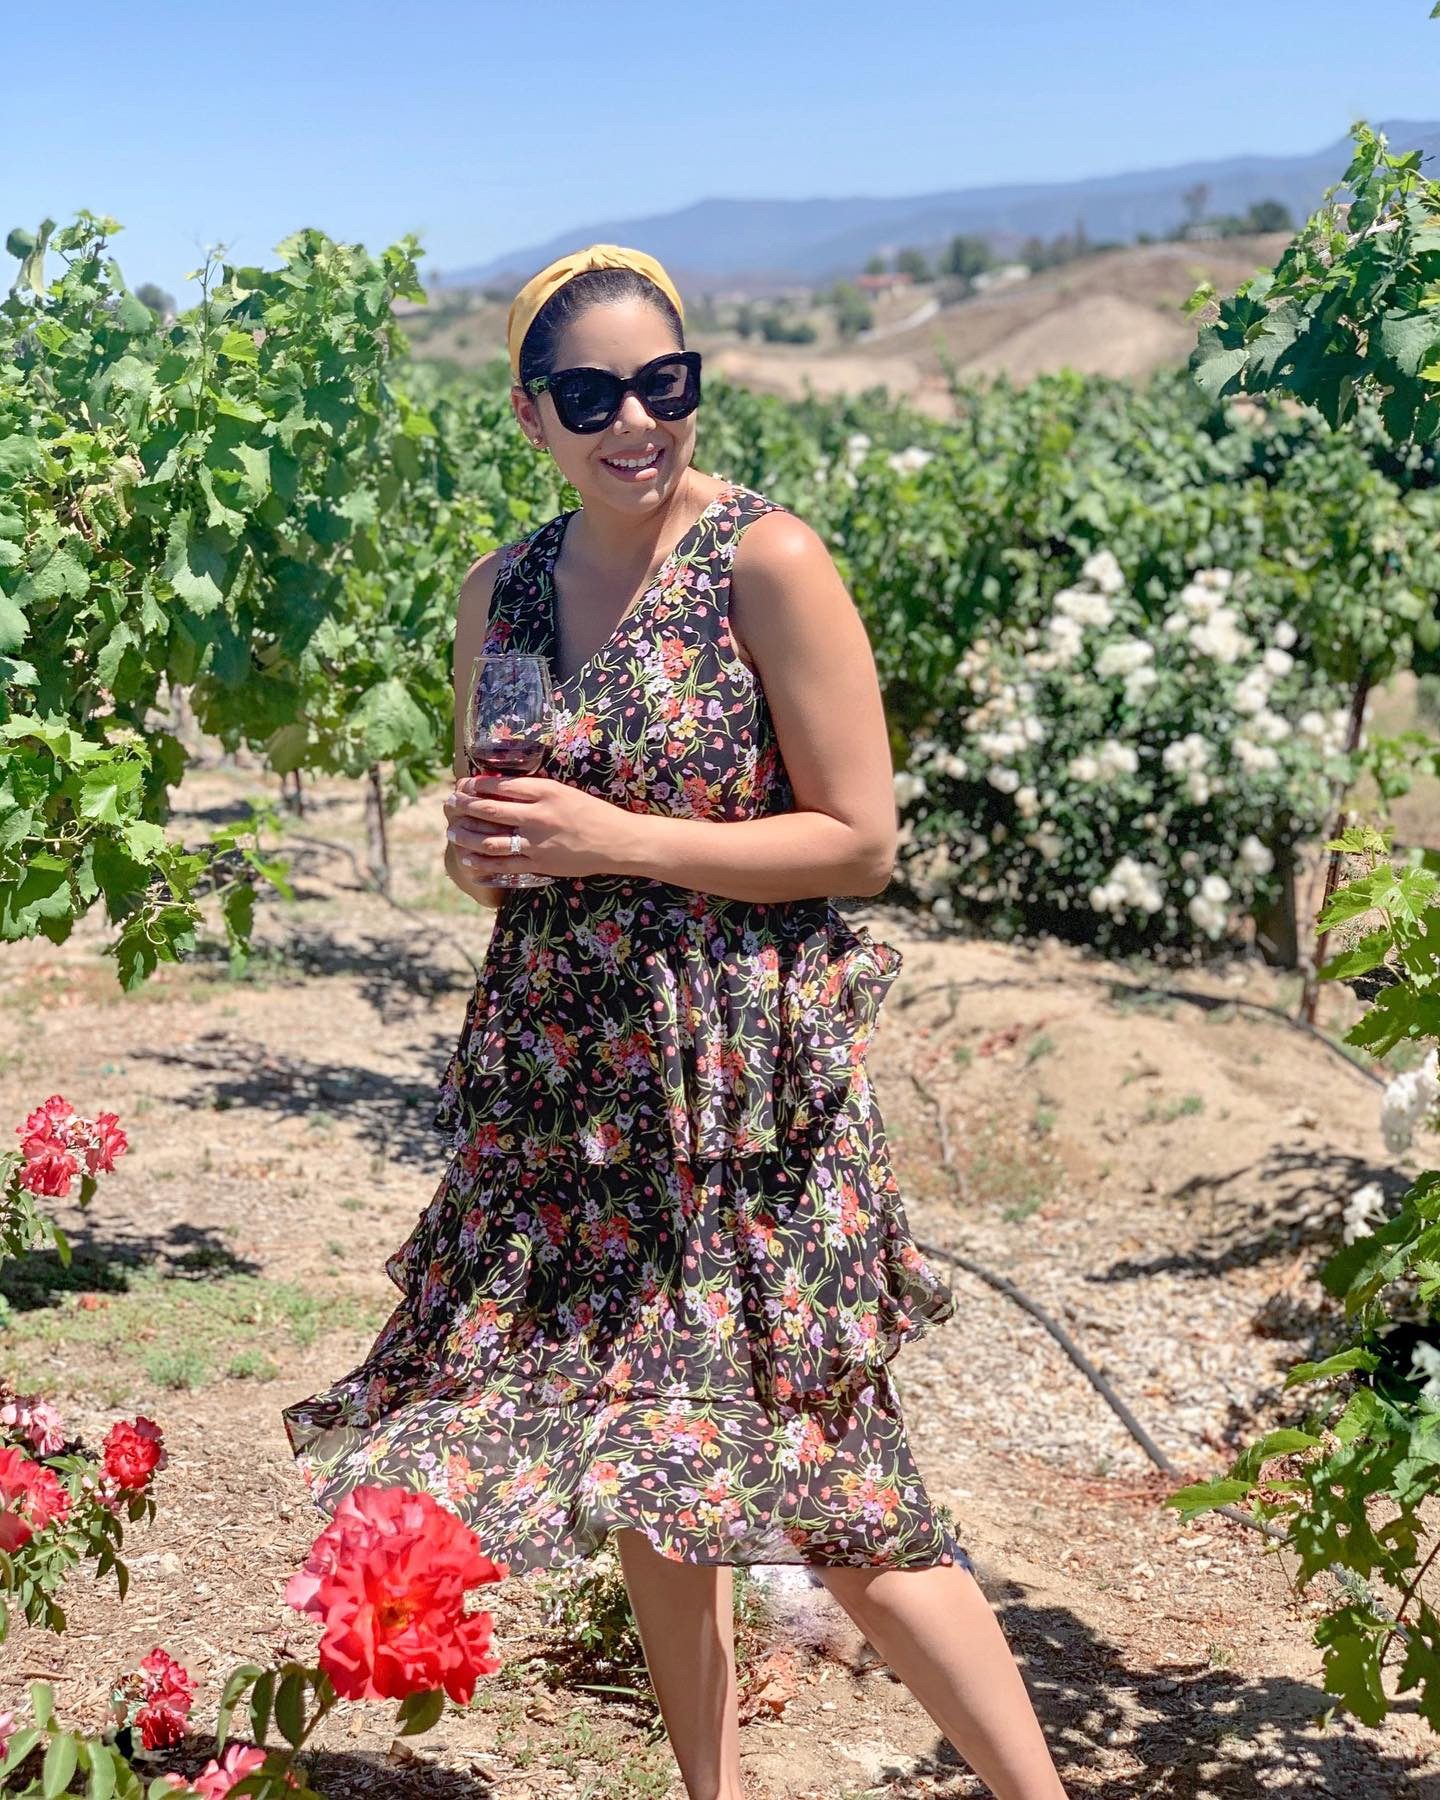 What to wear wine tasting in temecula, temecula wine tasting outfit, san diego fashion blogger